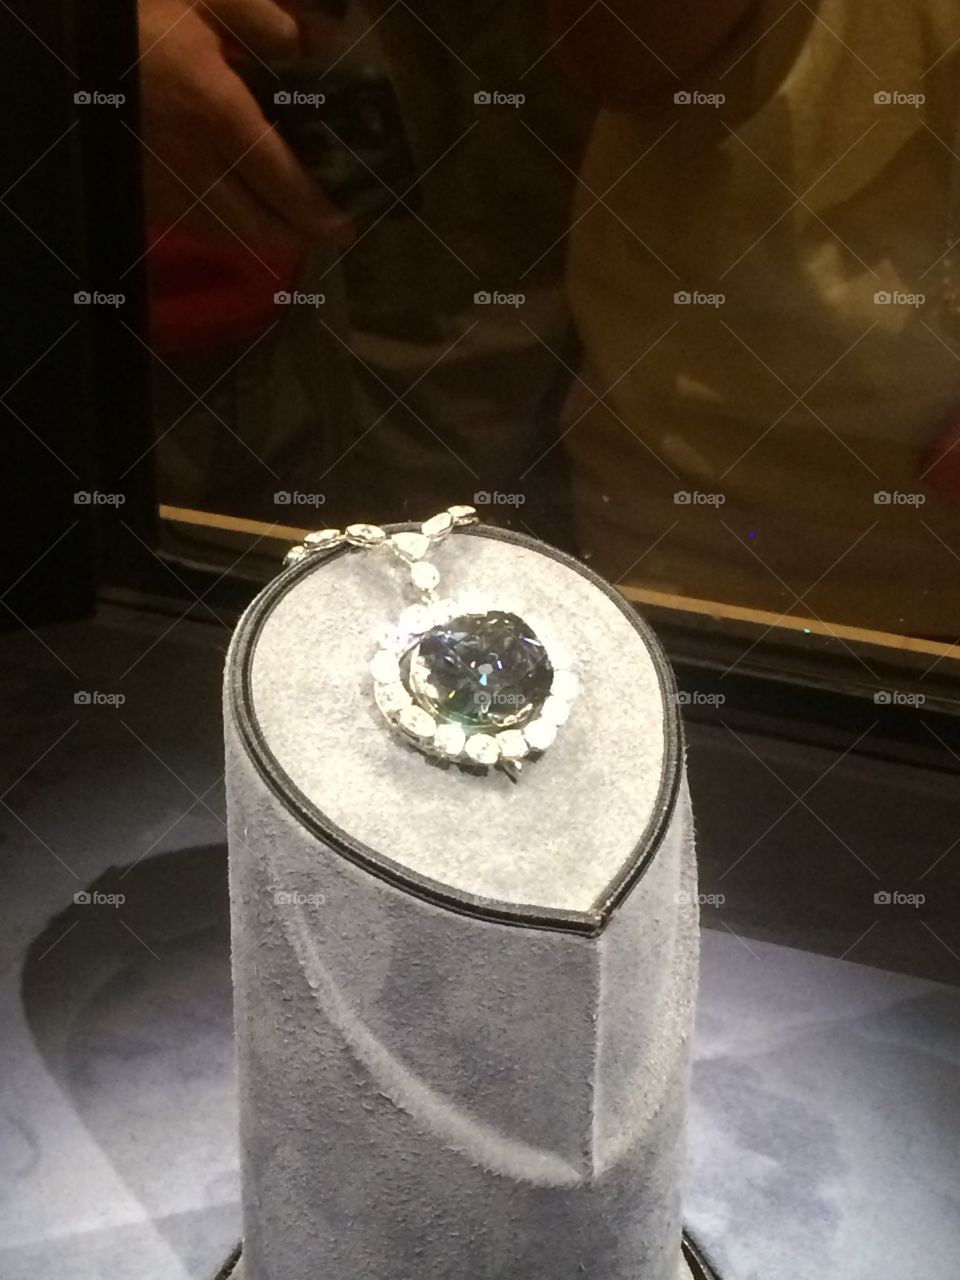 Hope diamond at National History Museum in Washington D. C. The hope diamond is one of the biggest diamond in the world if not the biggest.